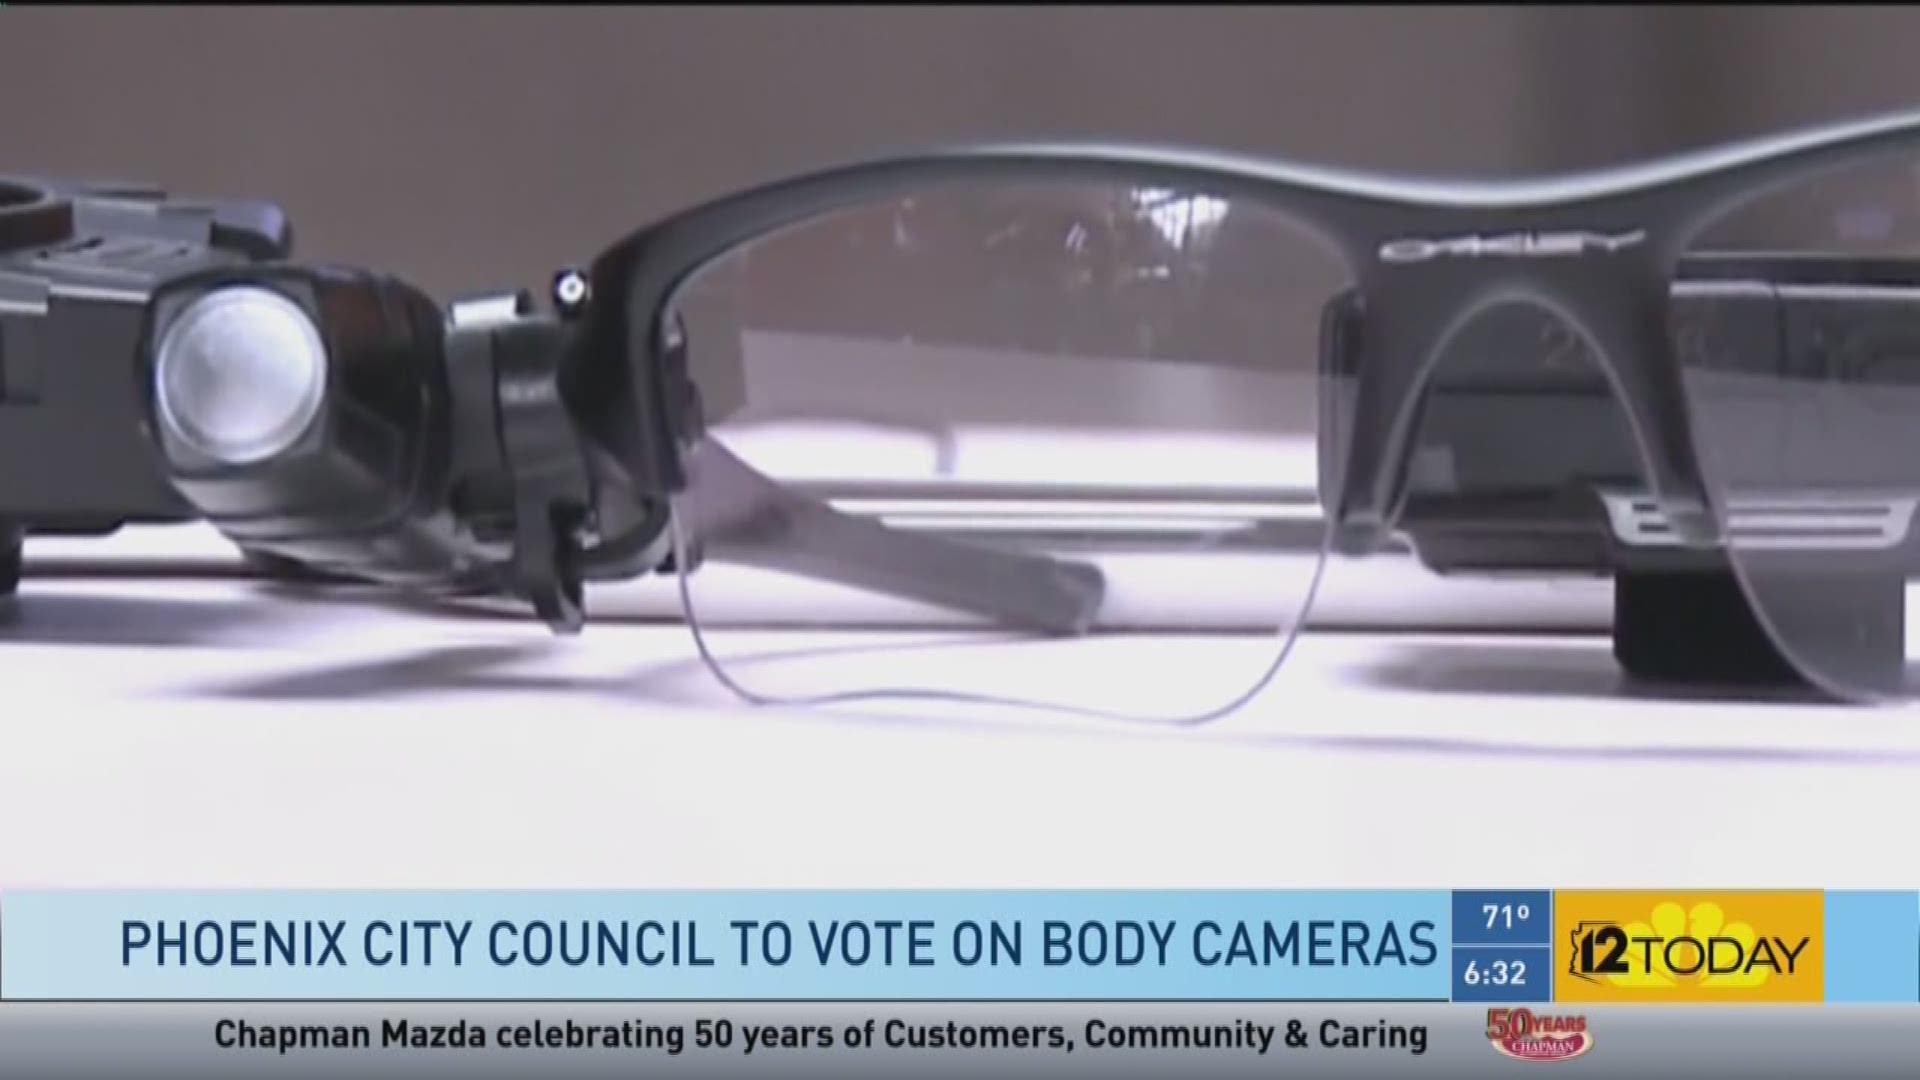 The Phoenix City Council will decide on whether or not to provide body cameras to its police force on Tuesday, May 17, 2016.